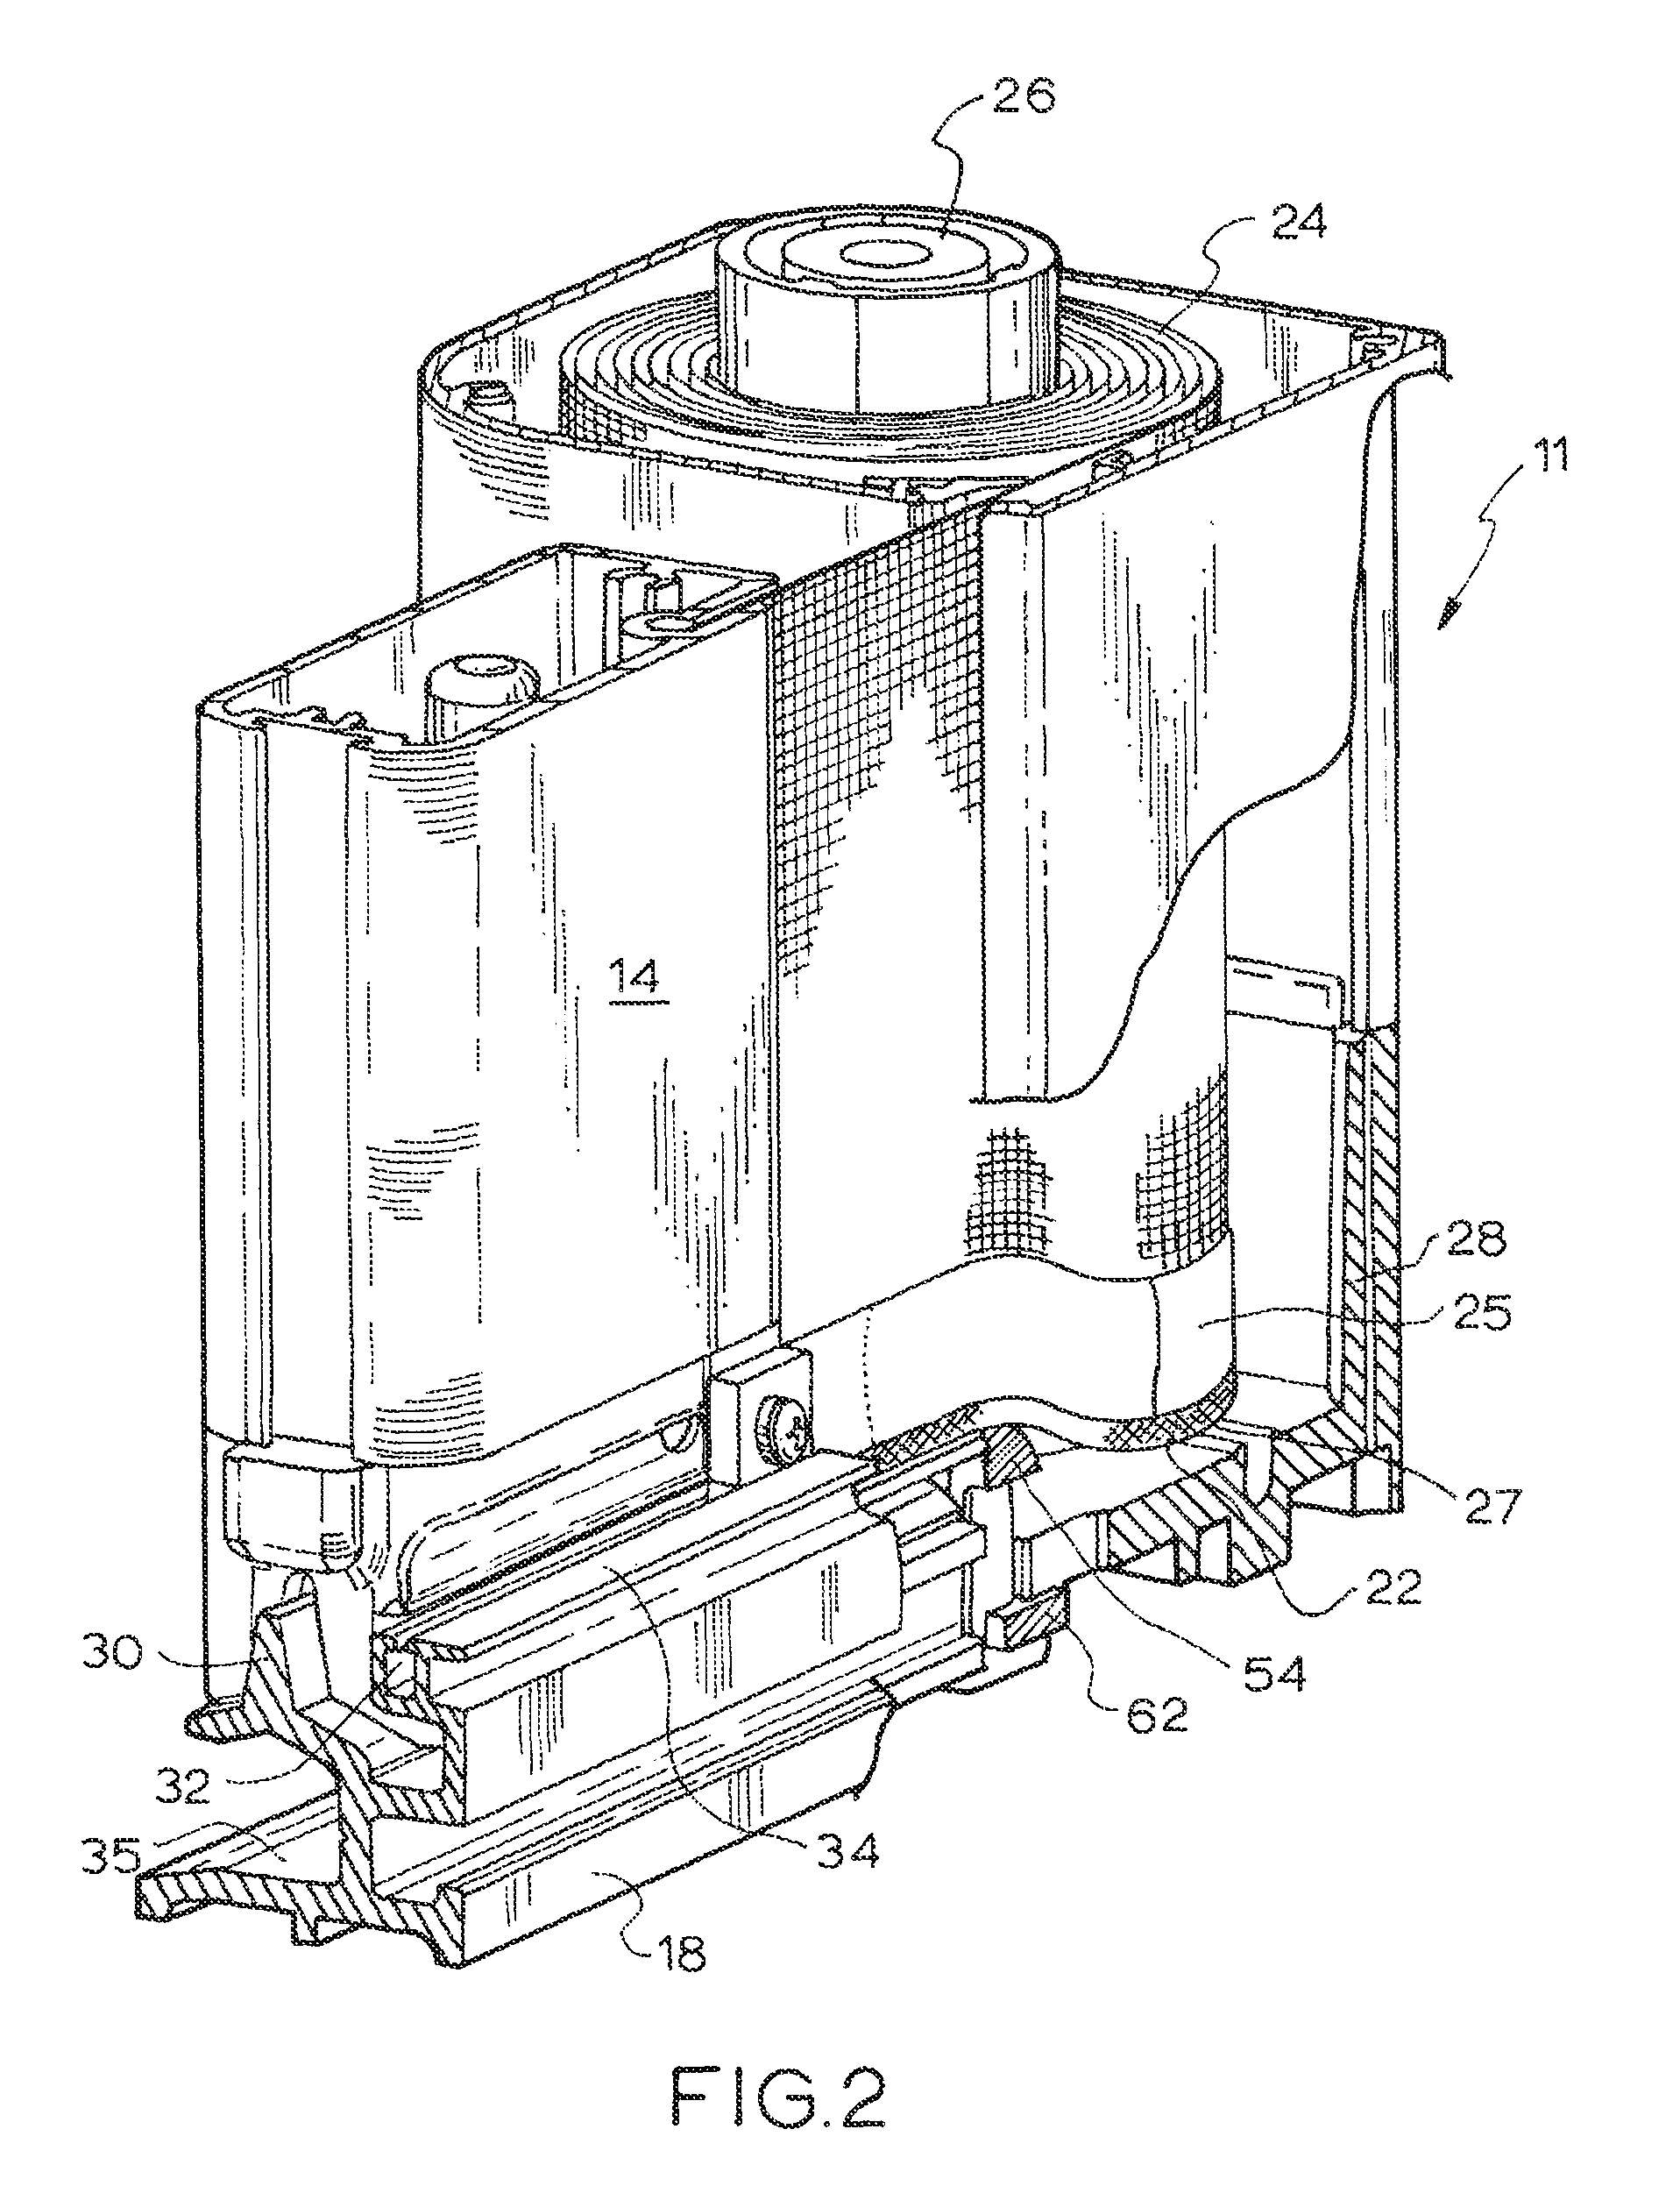 Roller assembly and guide for a retractable screen